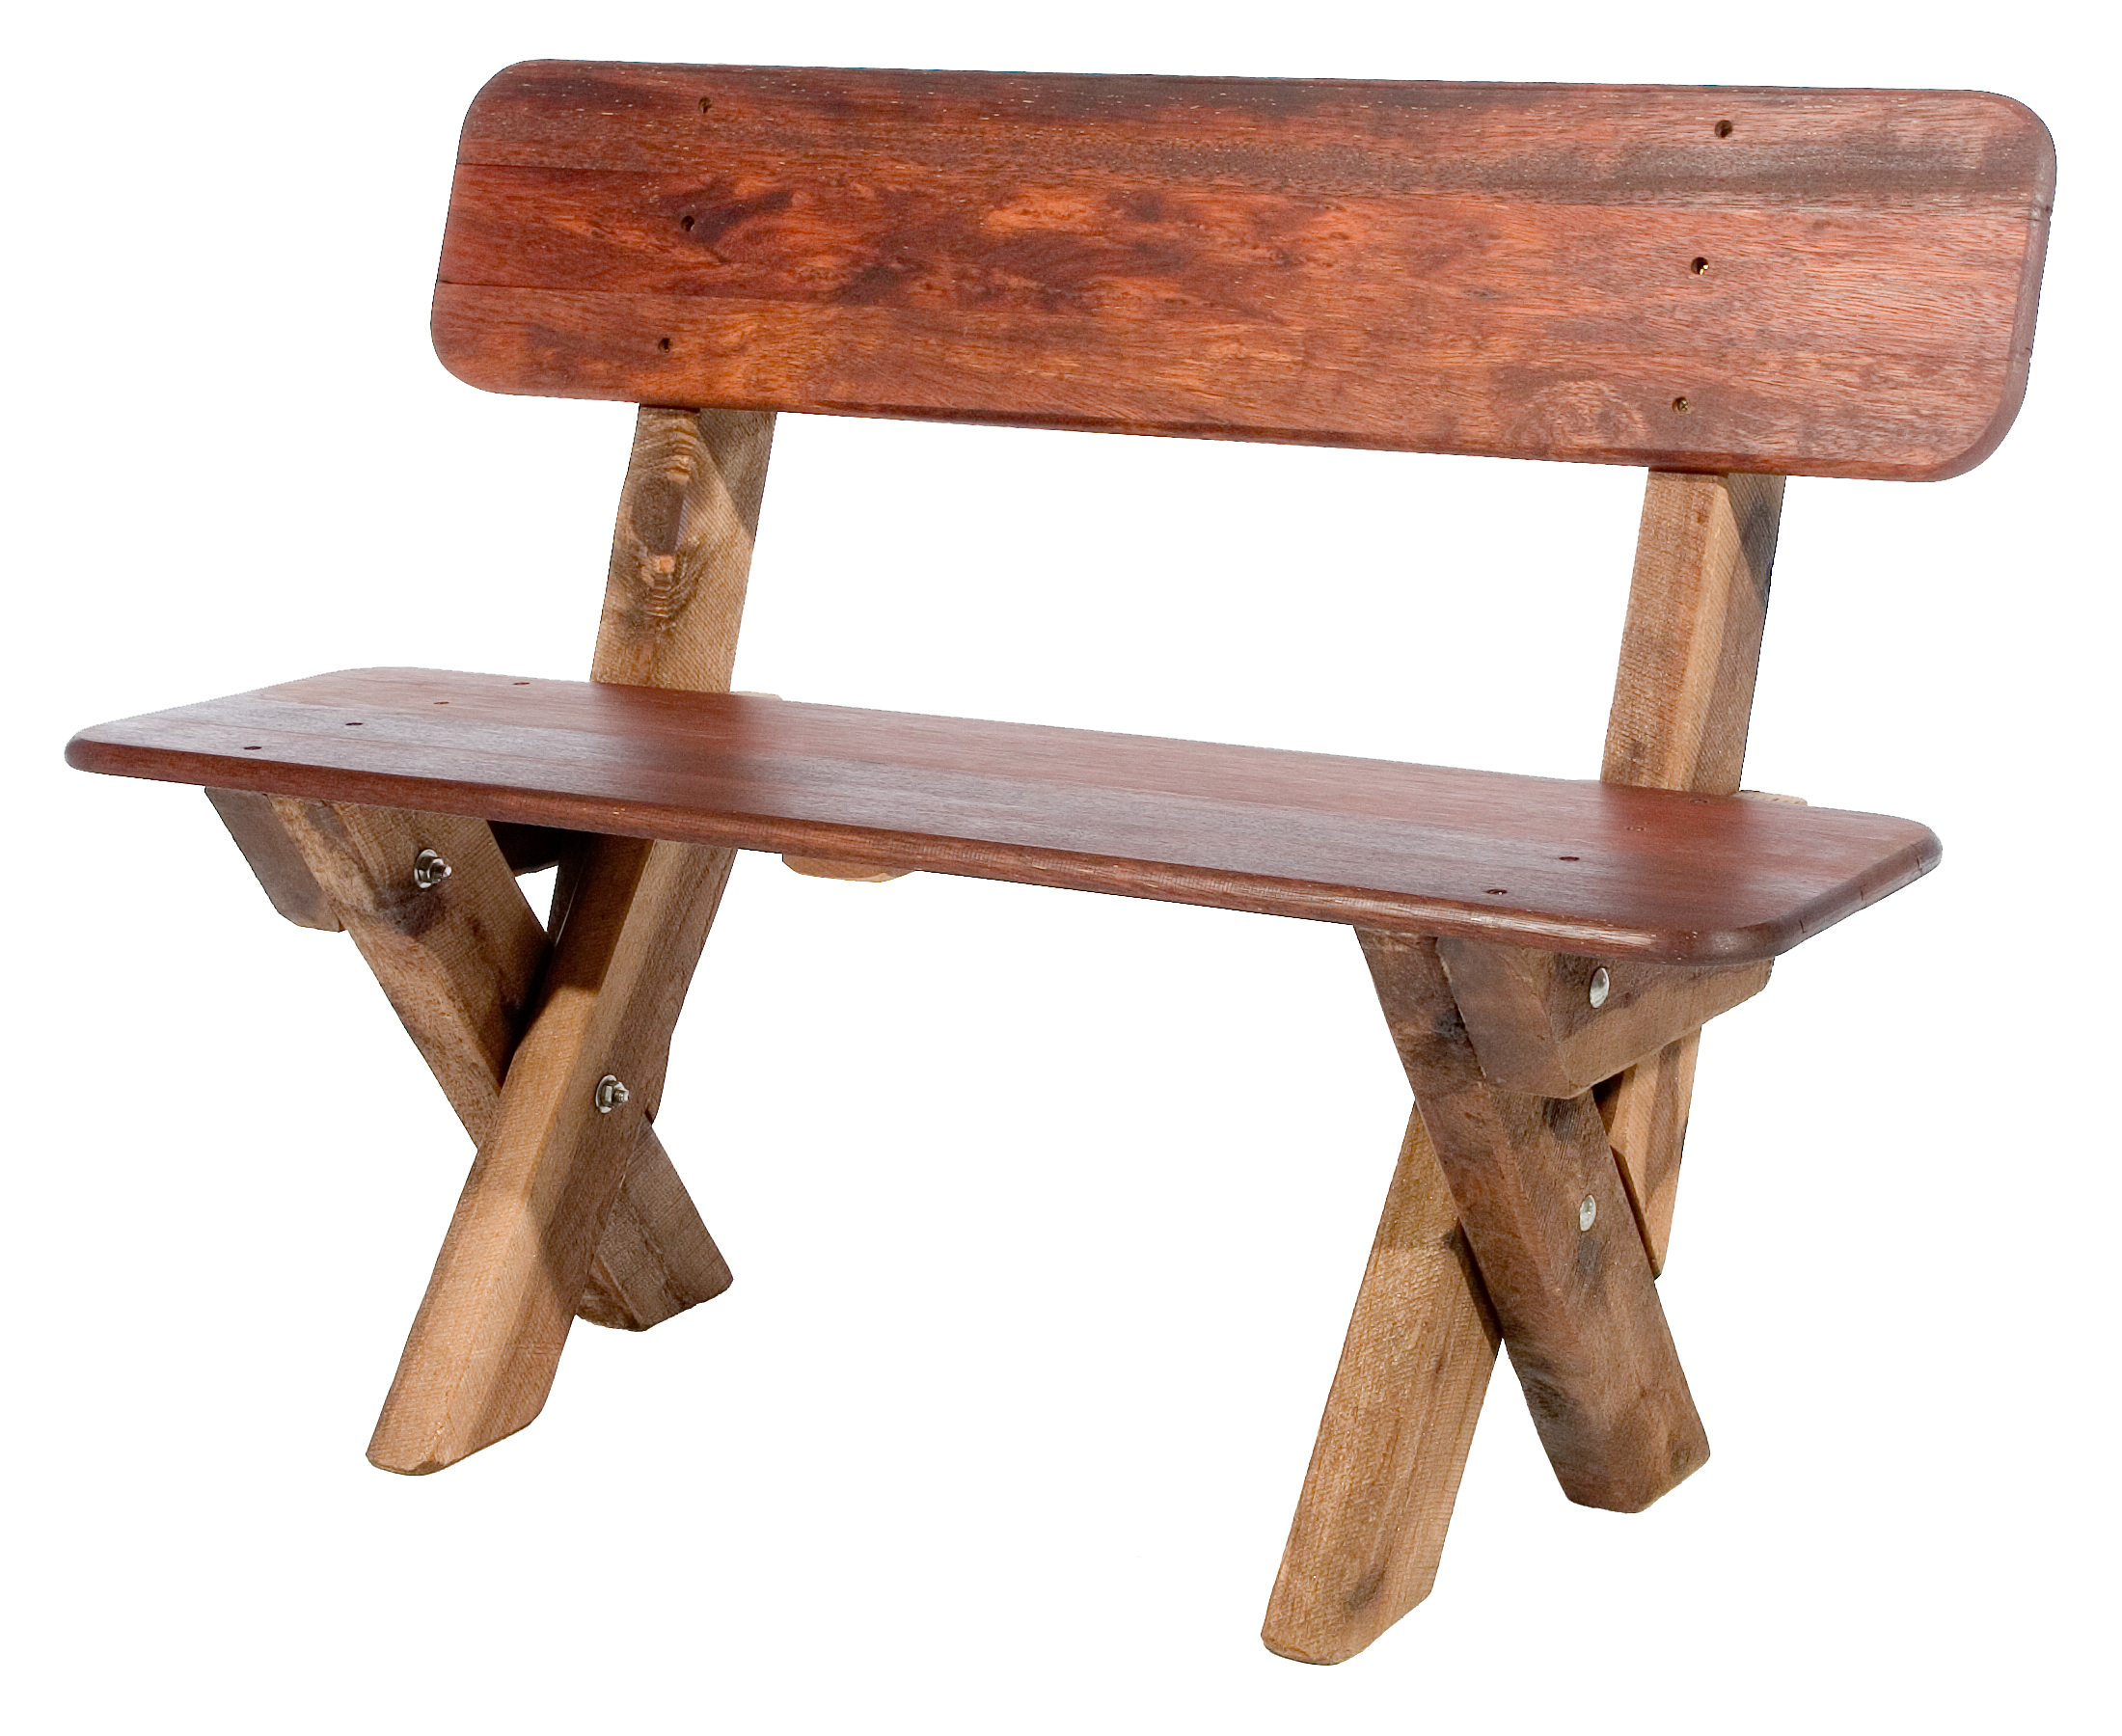 2 Seat High Back Kwila Outdoor Timber Bench available to order now